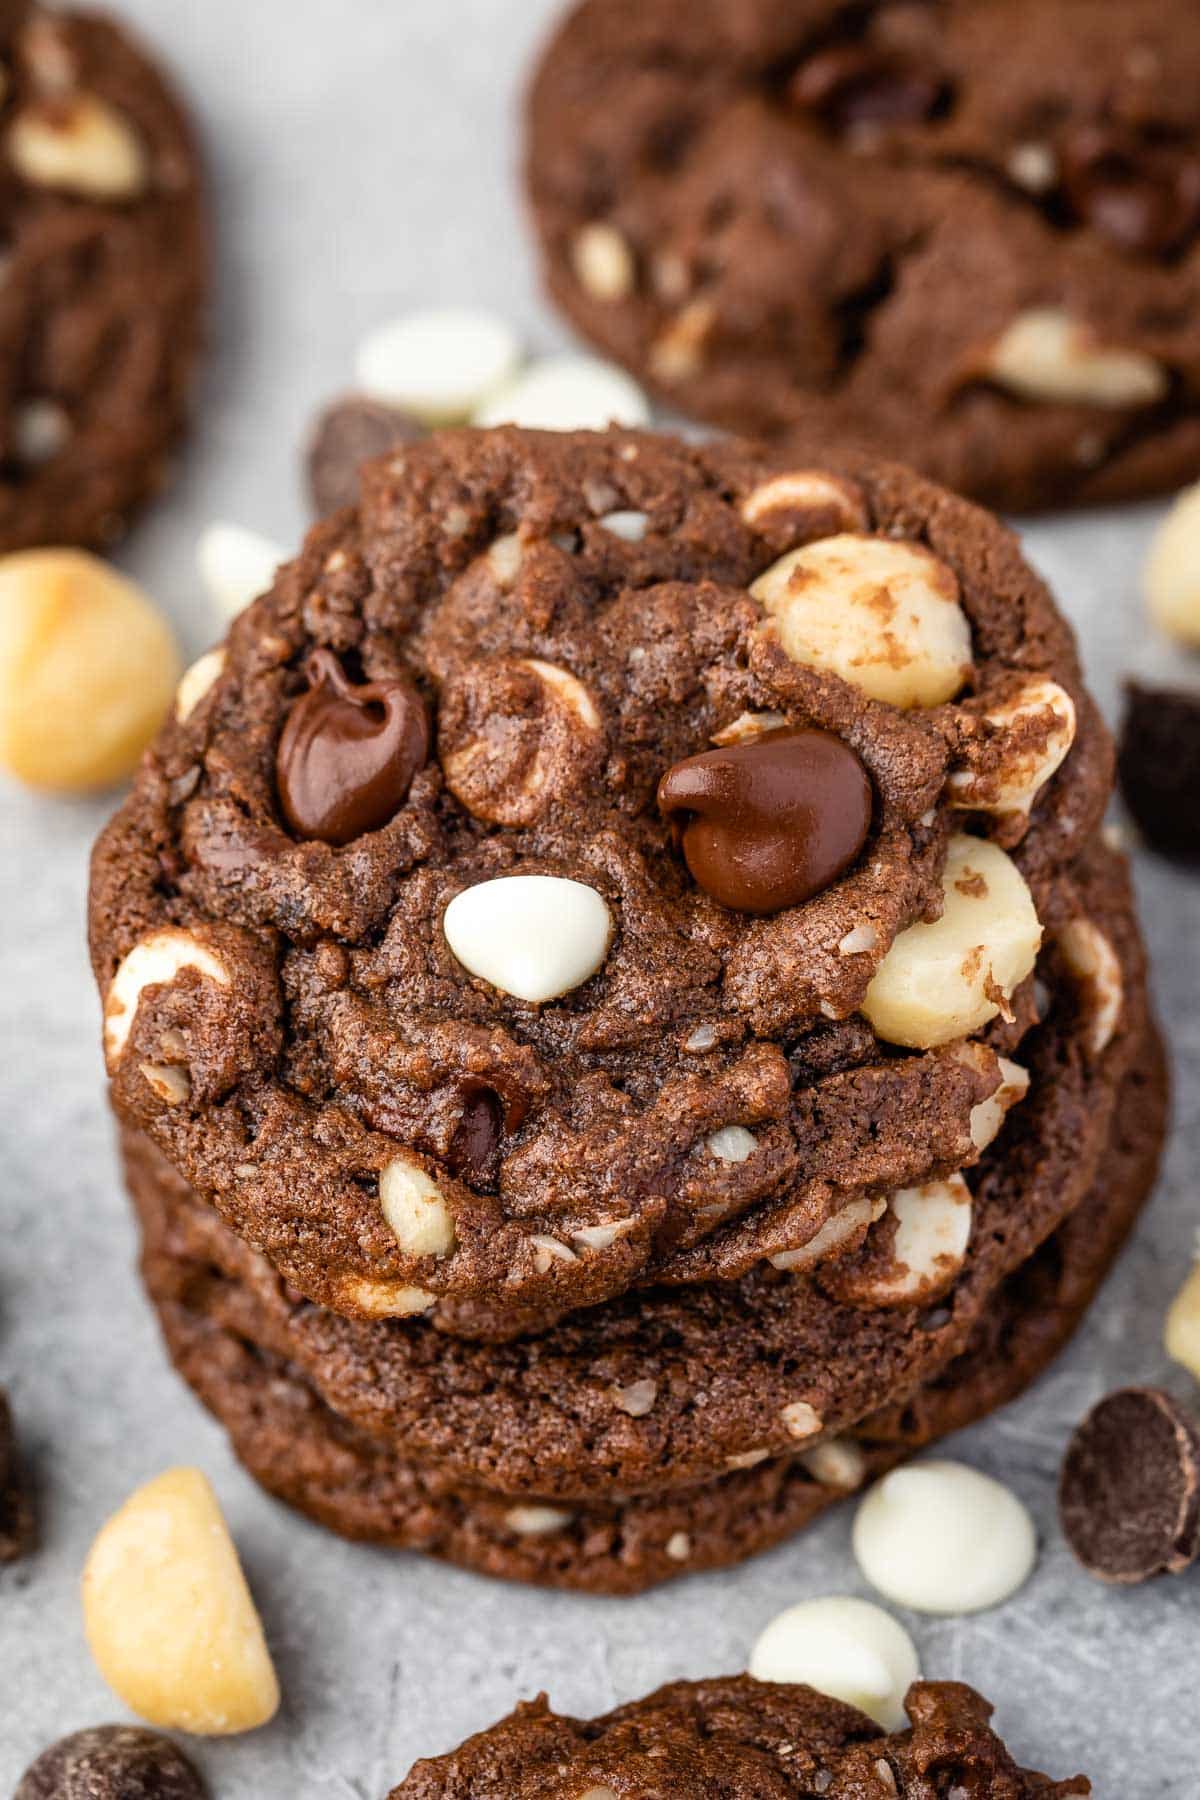 cookies with chocolate chips and macadamia nuts baked in.